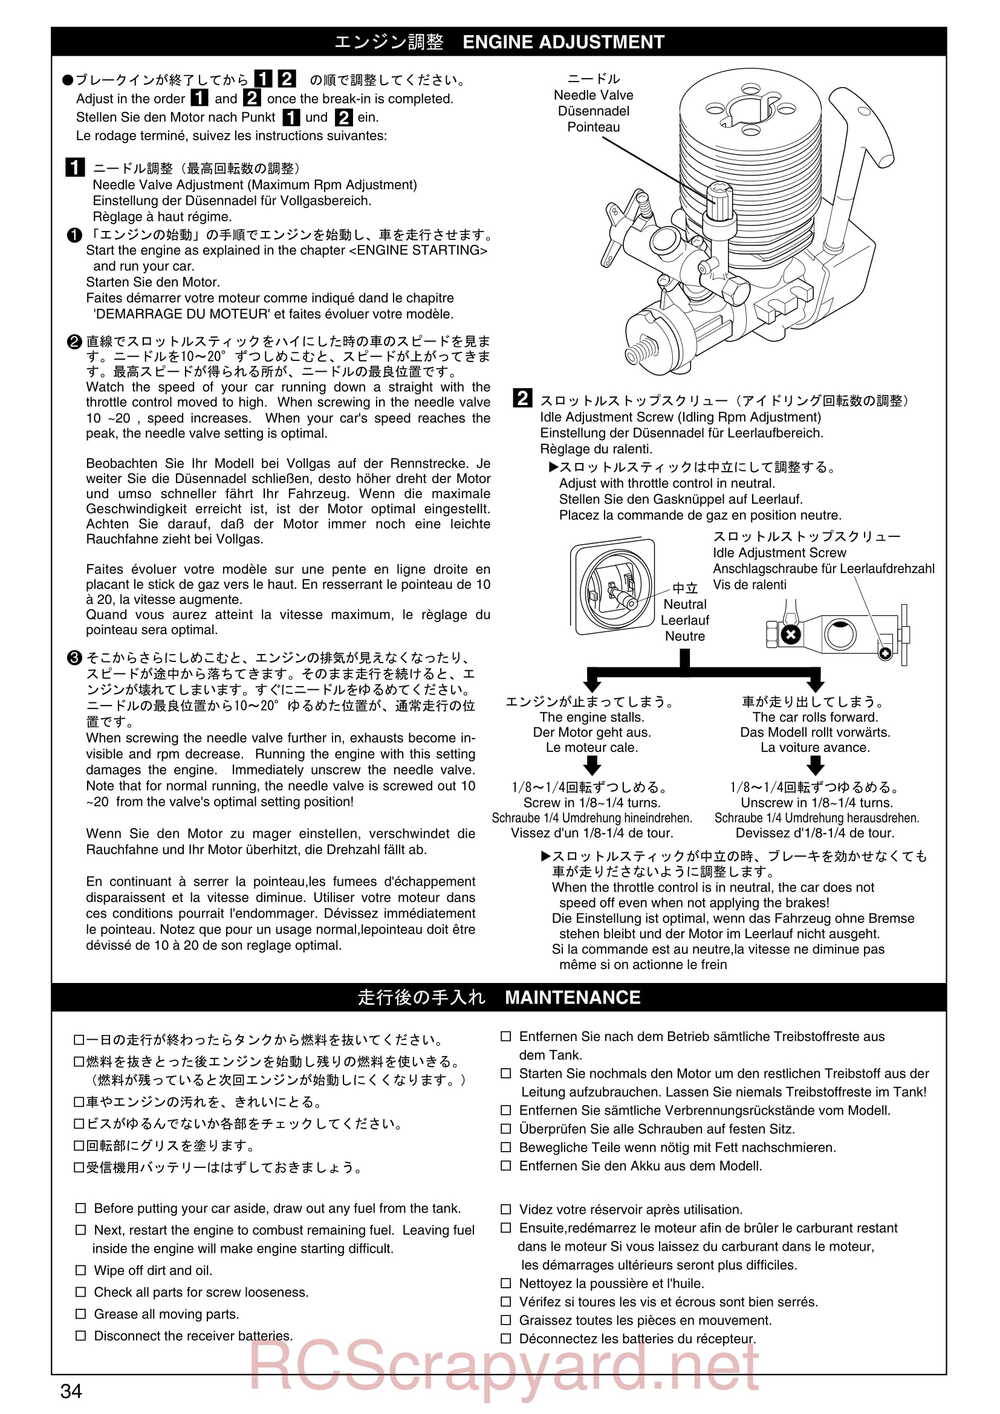 Kyosho - 31122 - V-One S2 - Manual - Page 34